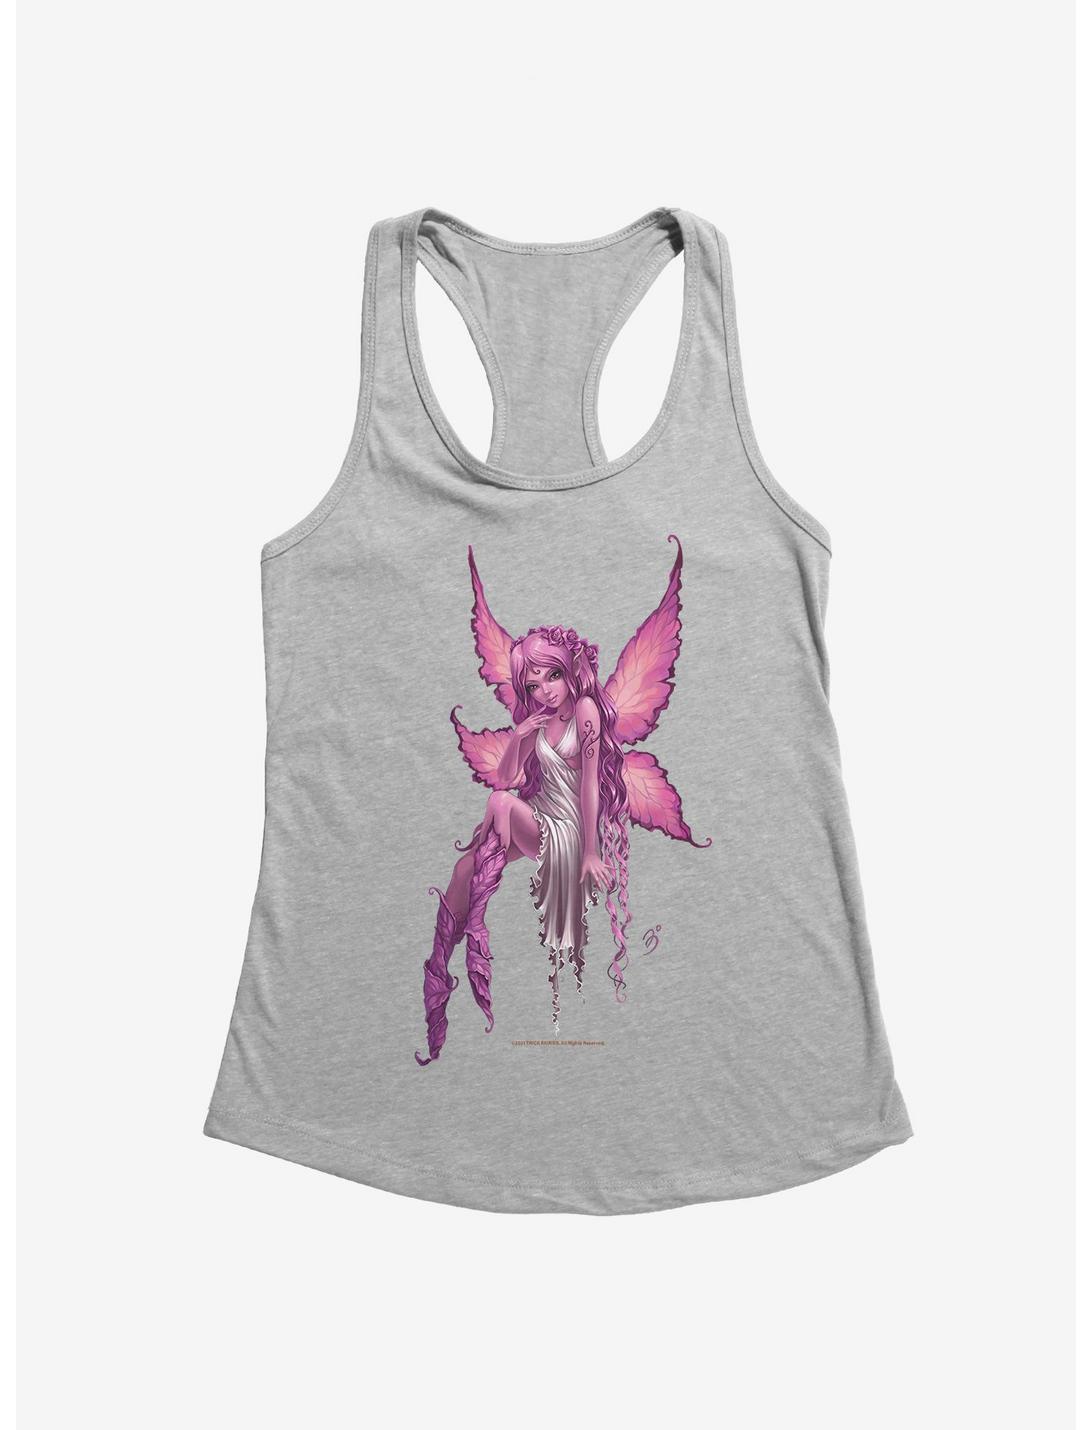 Fairies By Trick Blossom Wing Fairy Girls Tank, , hi-res